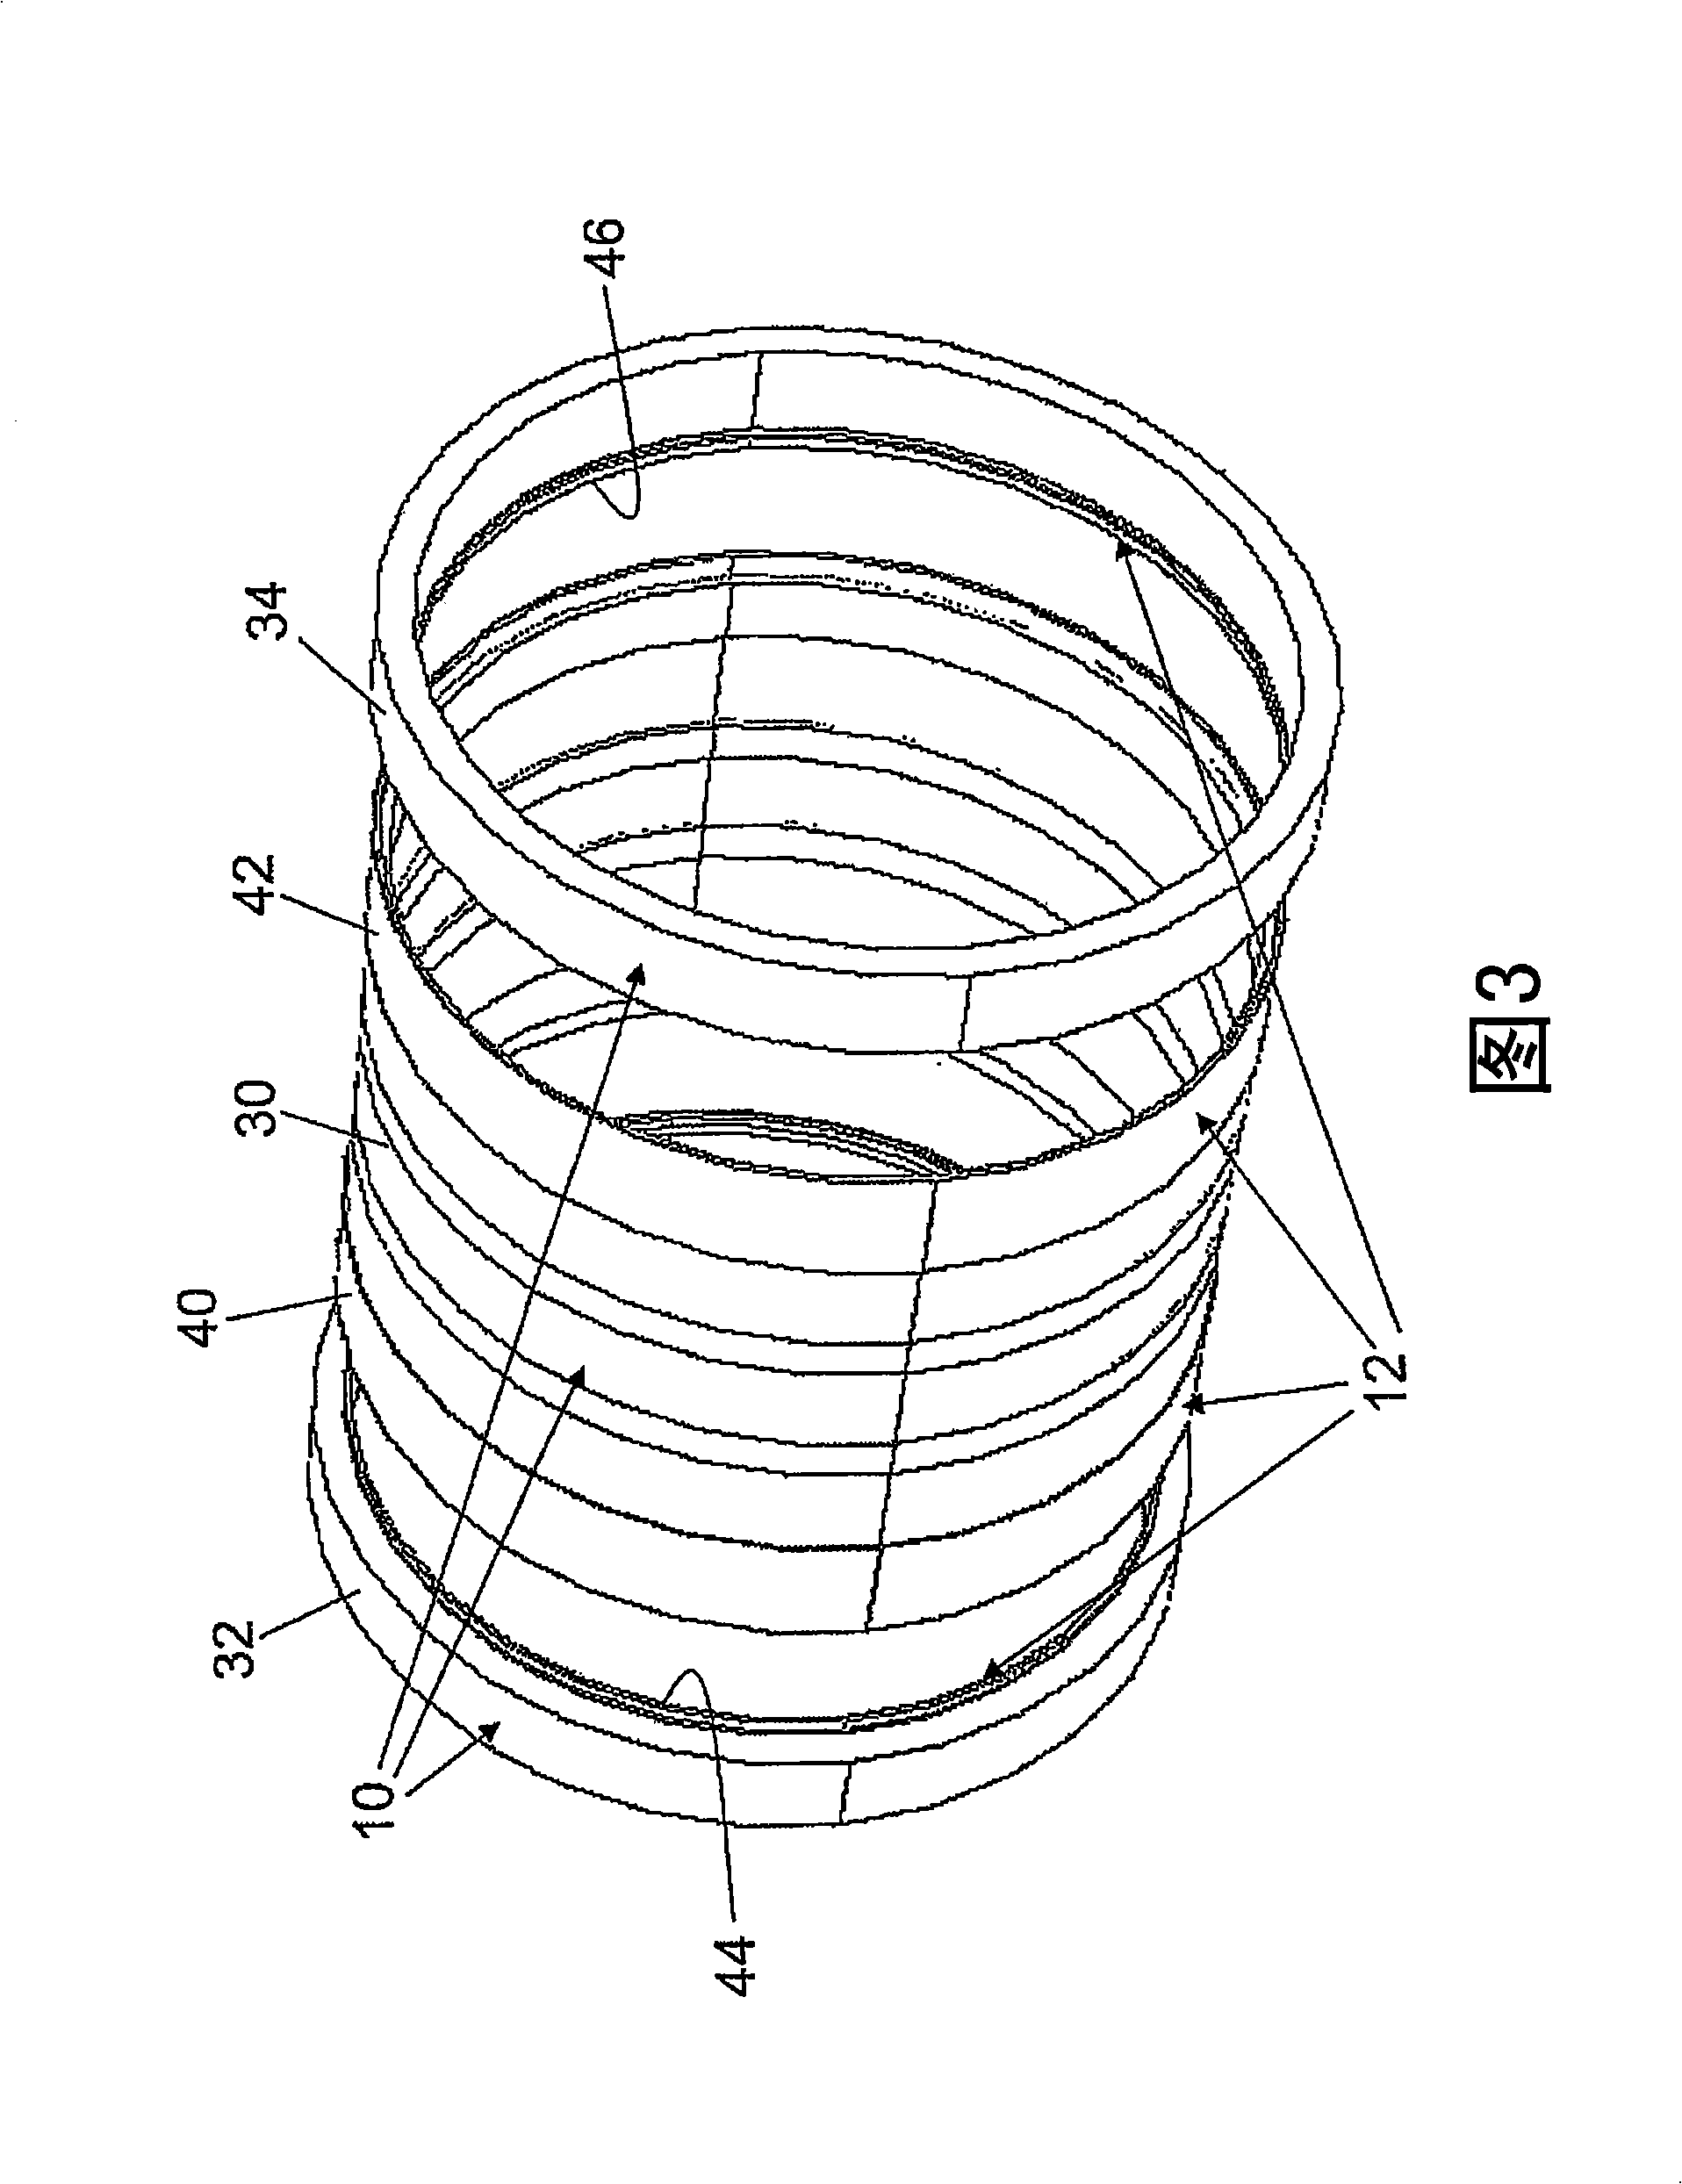 Magnetic resonance scanner with a longitudinal magnetic field gradient system